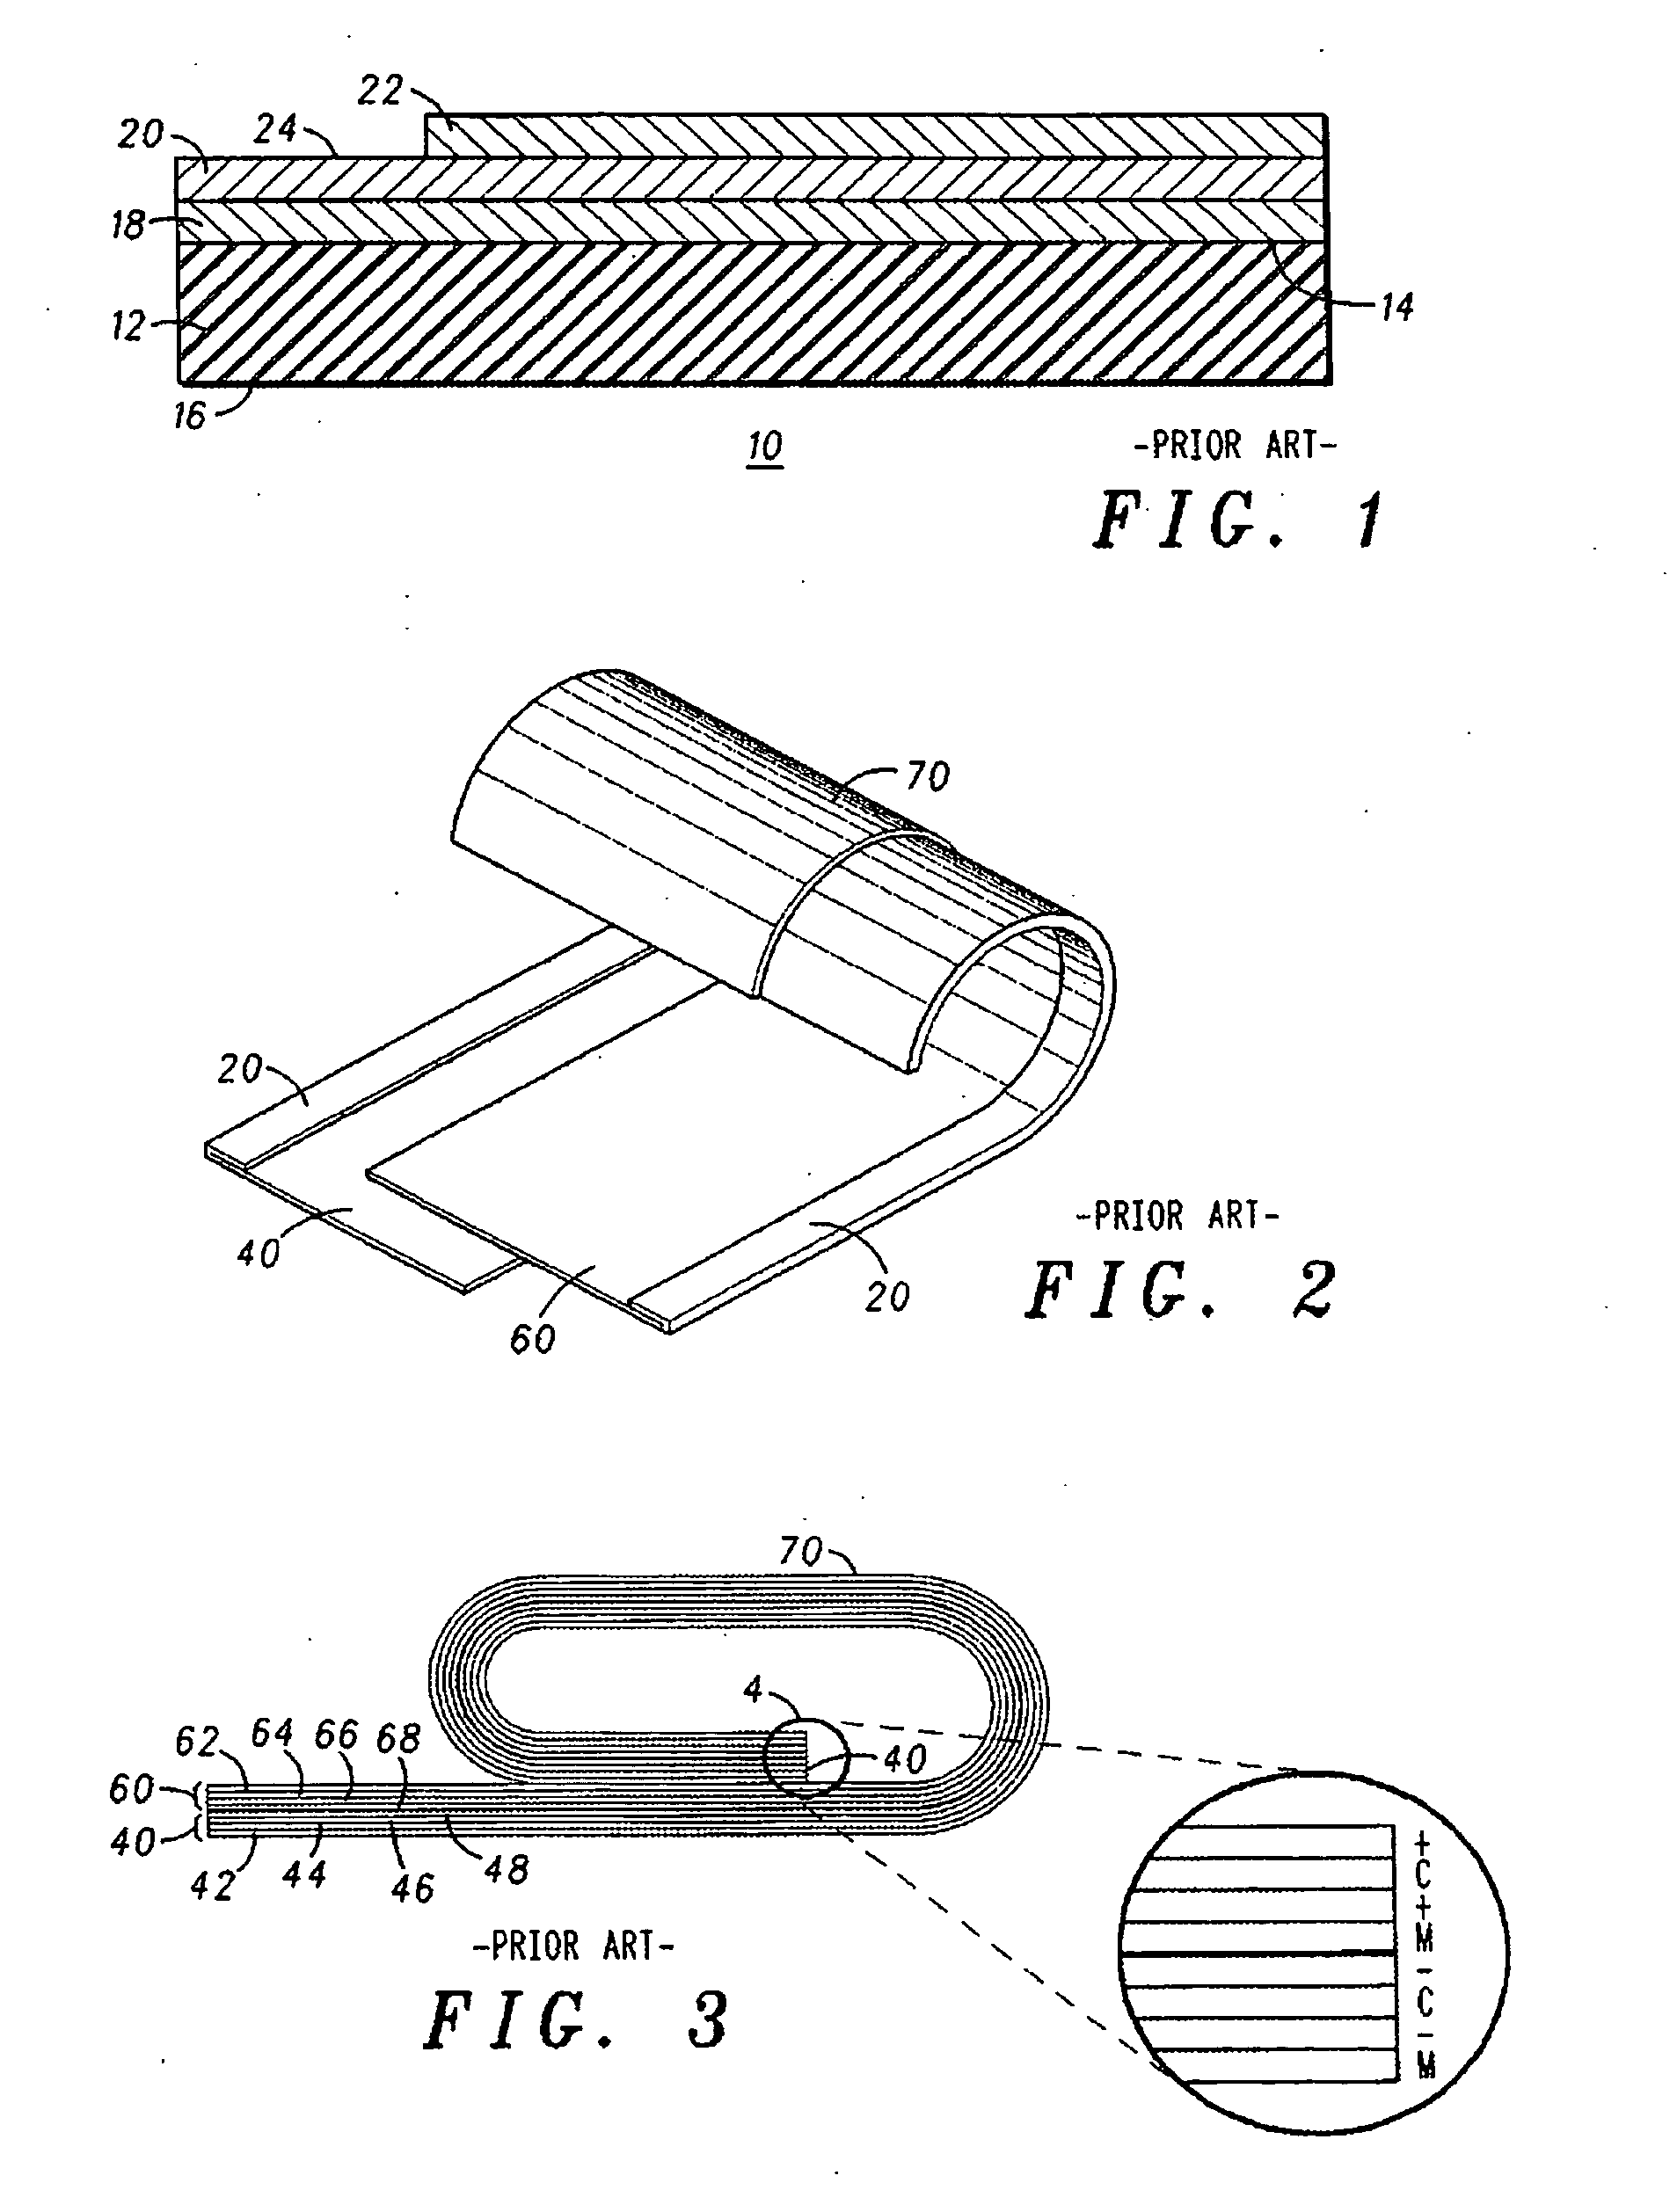 Impact resistant electrochemical cell with tapered electrode and crumple zone